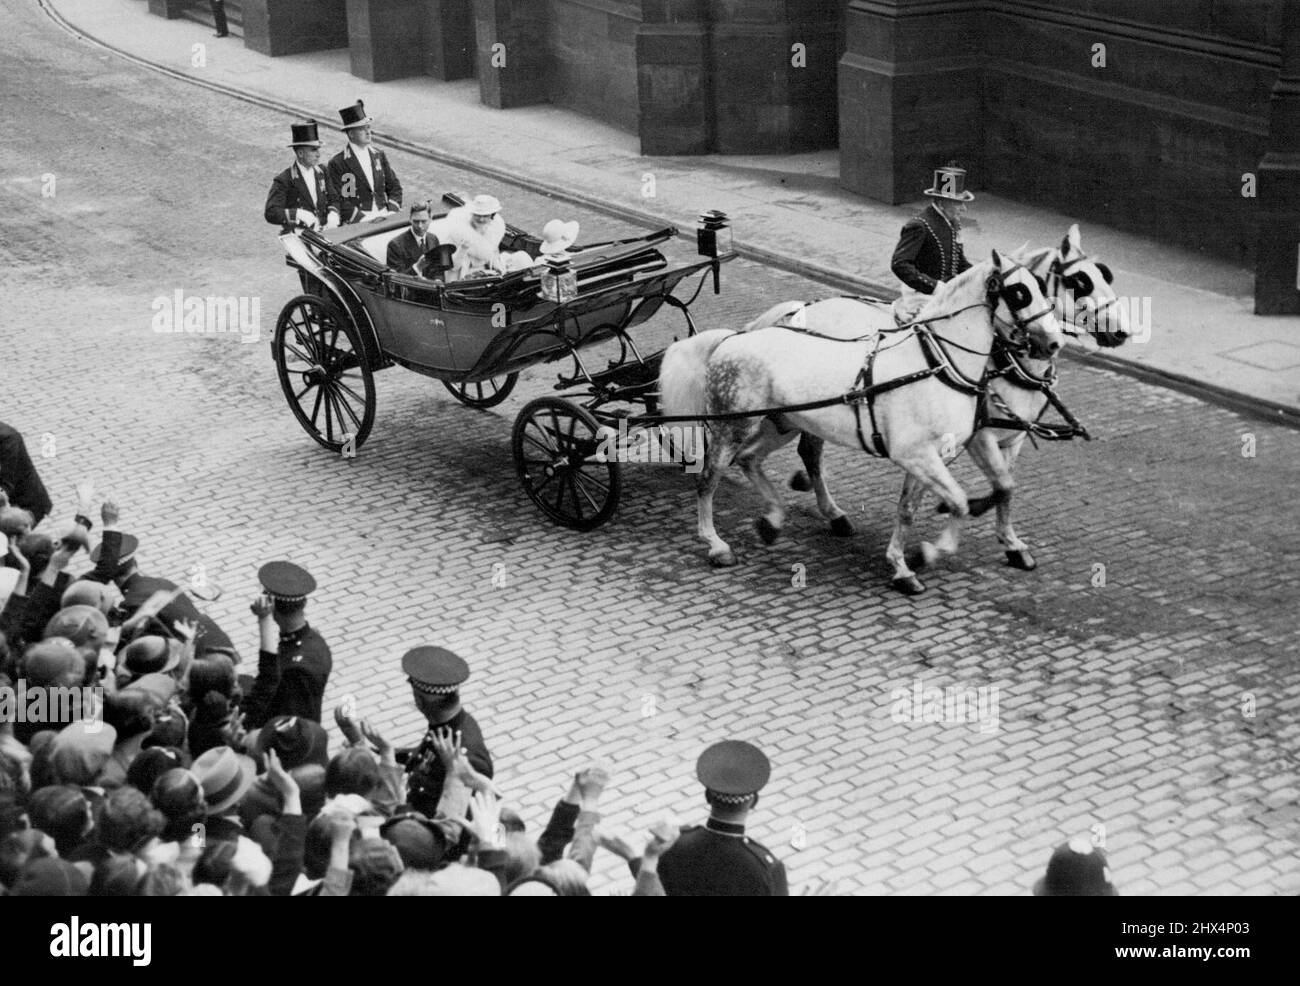 King And Queen at Divine Service: The King and Queen, accompanied by the princesses, arriving at St. Giles' Cathedral. Their Majesties the King and Queen, accompanied by Princess Elizabeth and Margaret Rose, yesterday attended divine service at St. Giles' Cathedral, Edinburgh, at the conclusion of their Scottish visit. July 12, 1937. (Photo by Topical Press). Stock Photo